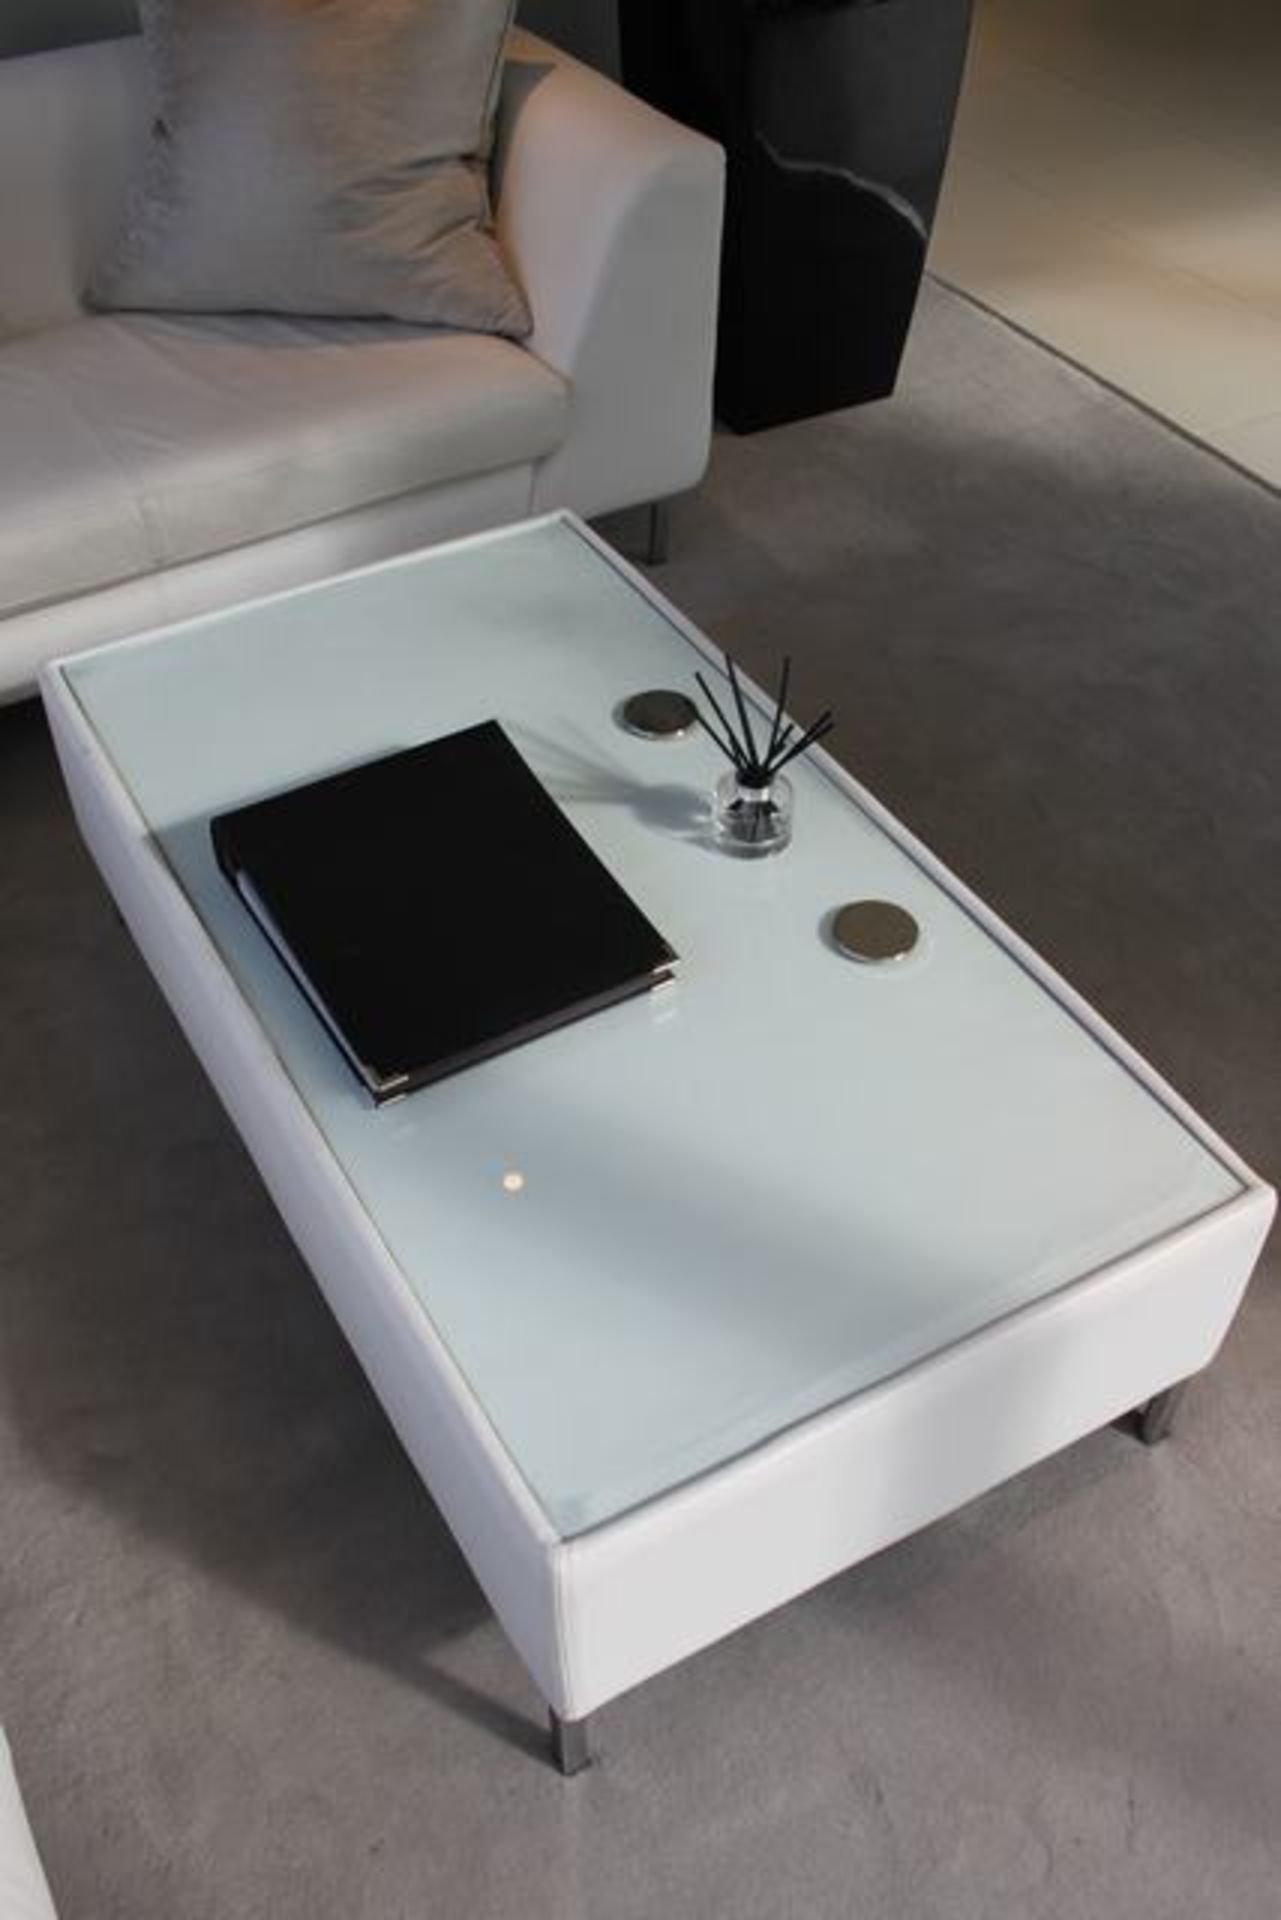 White bonded leather glass top coffee table chrome legs 1300mm x 720mm x 400mm - Image 2 of 2